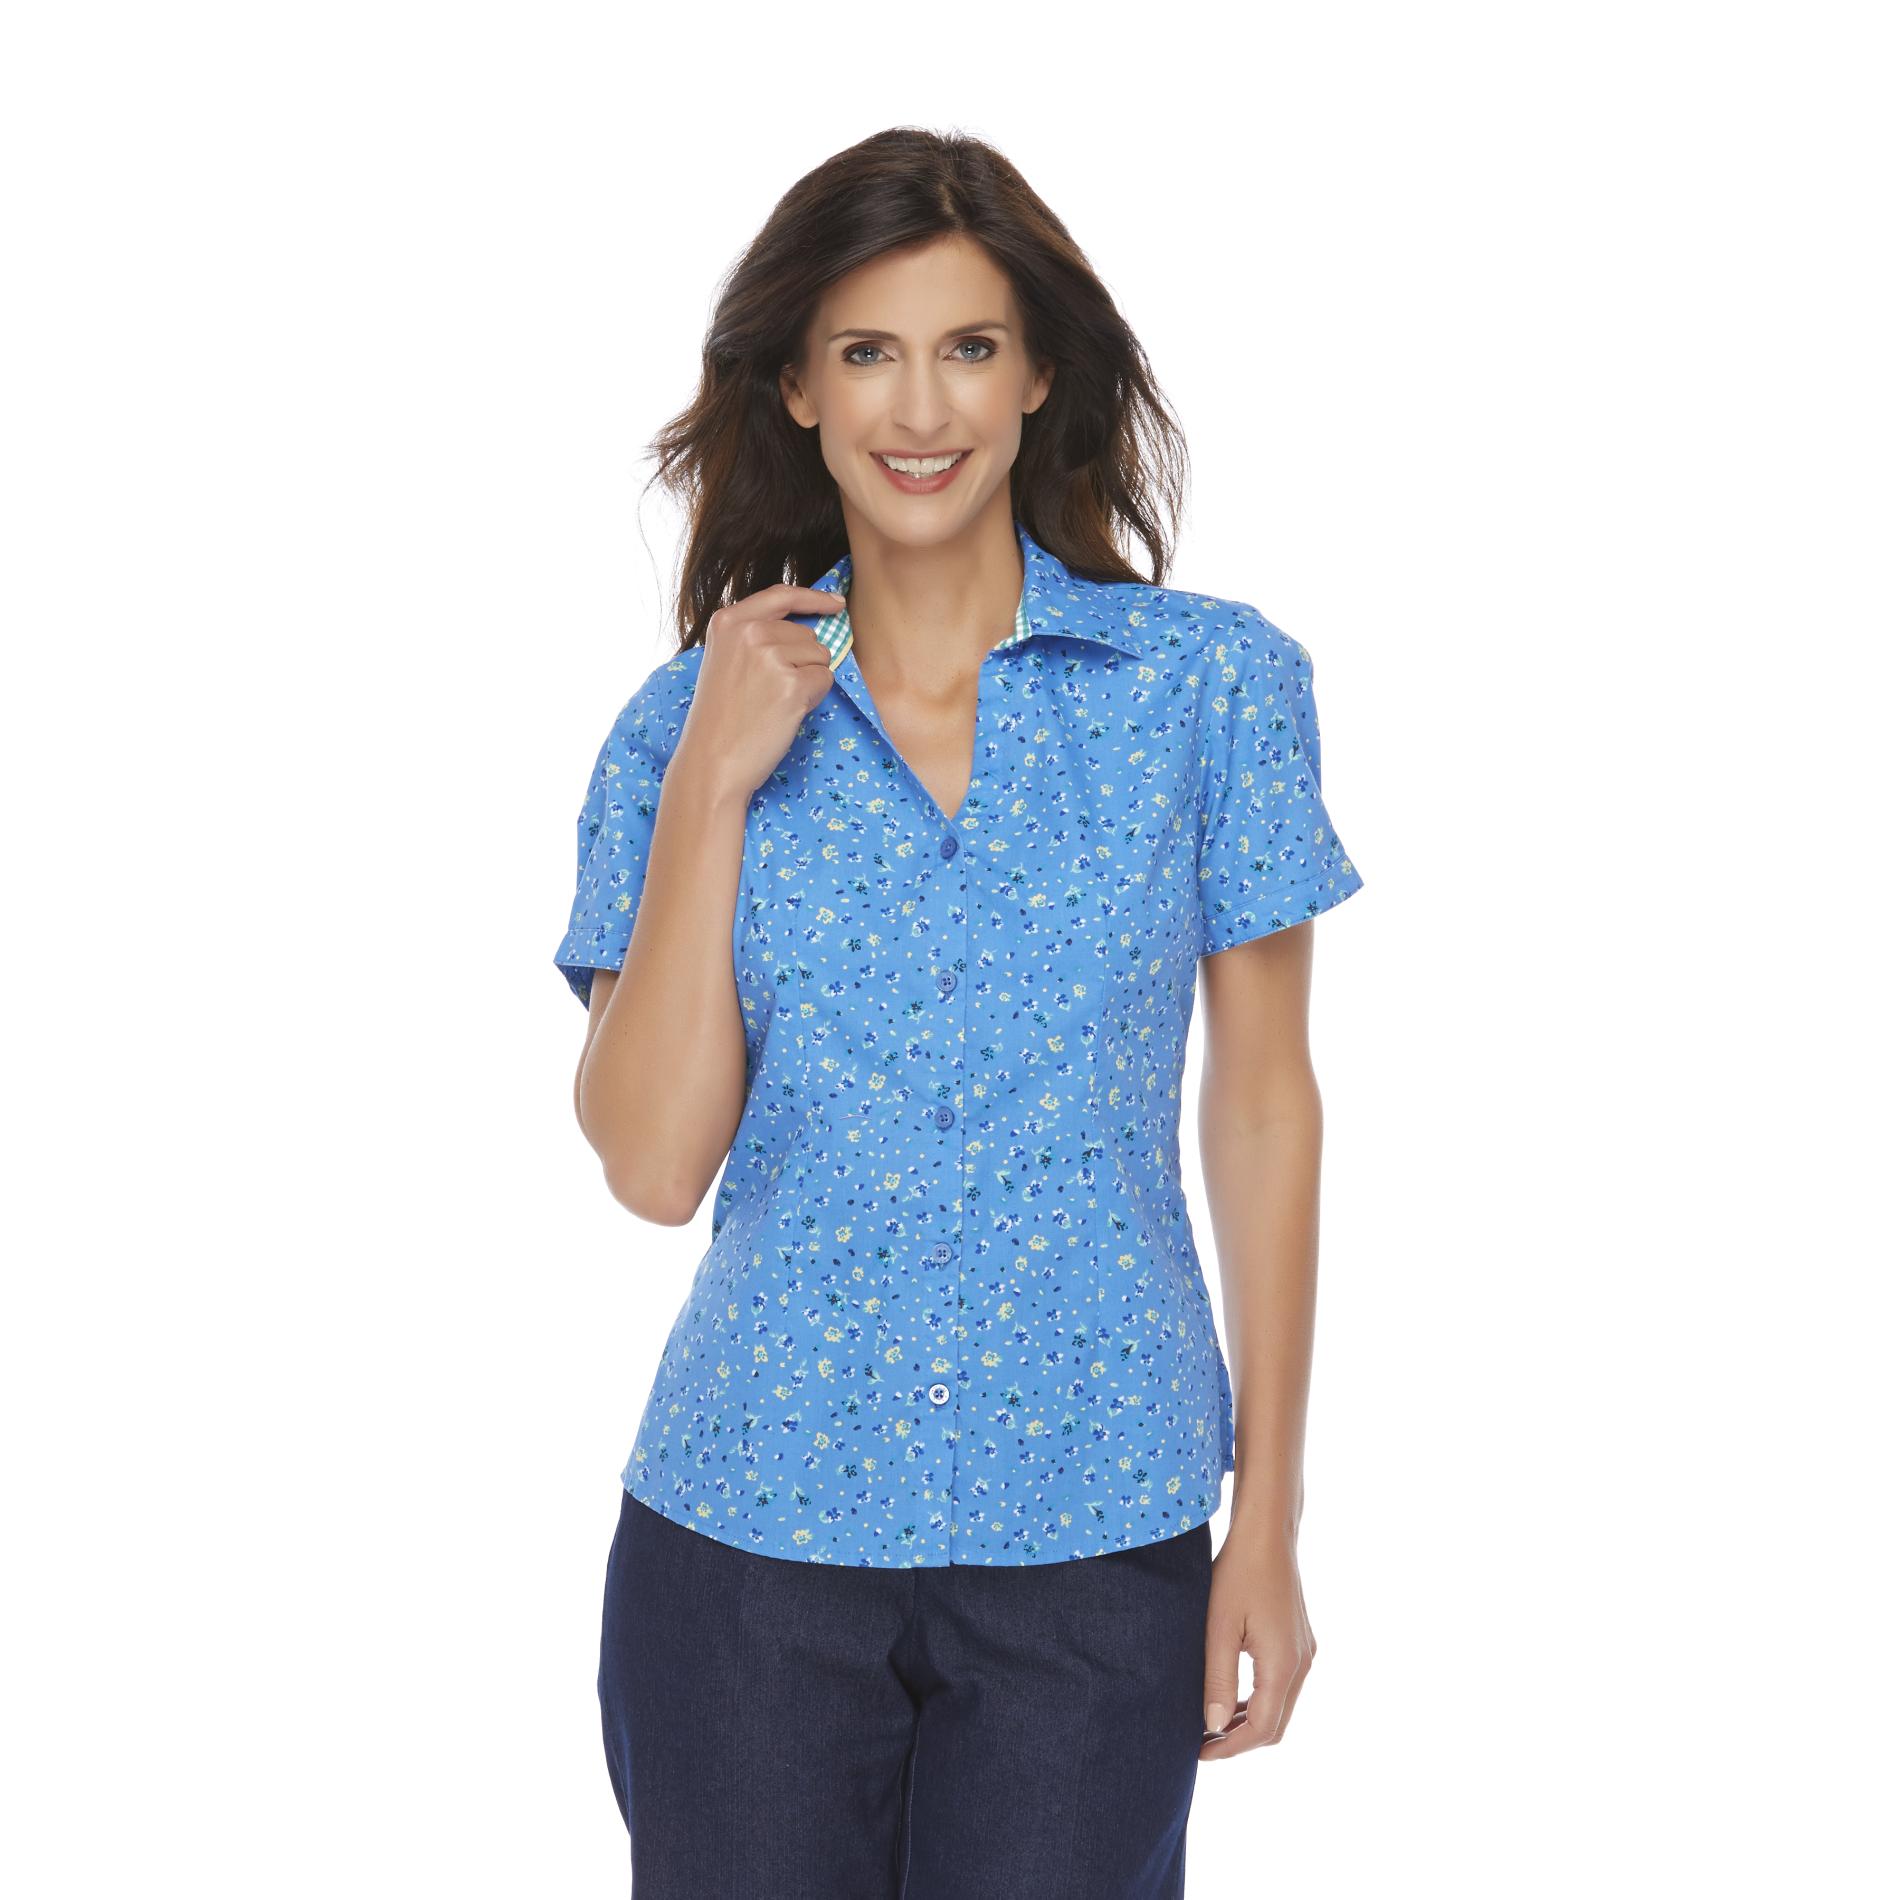 Basic Editions Women's Woven Camp Shirt - Floral